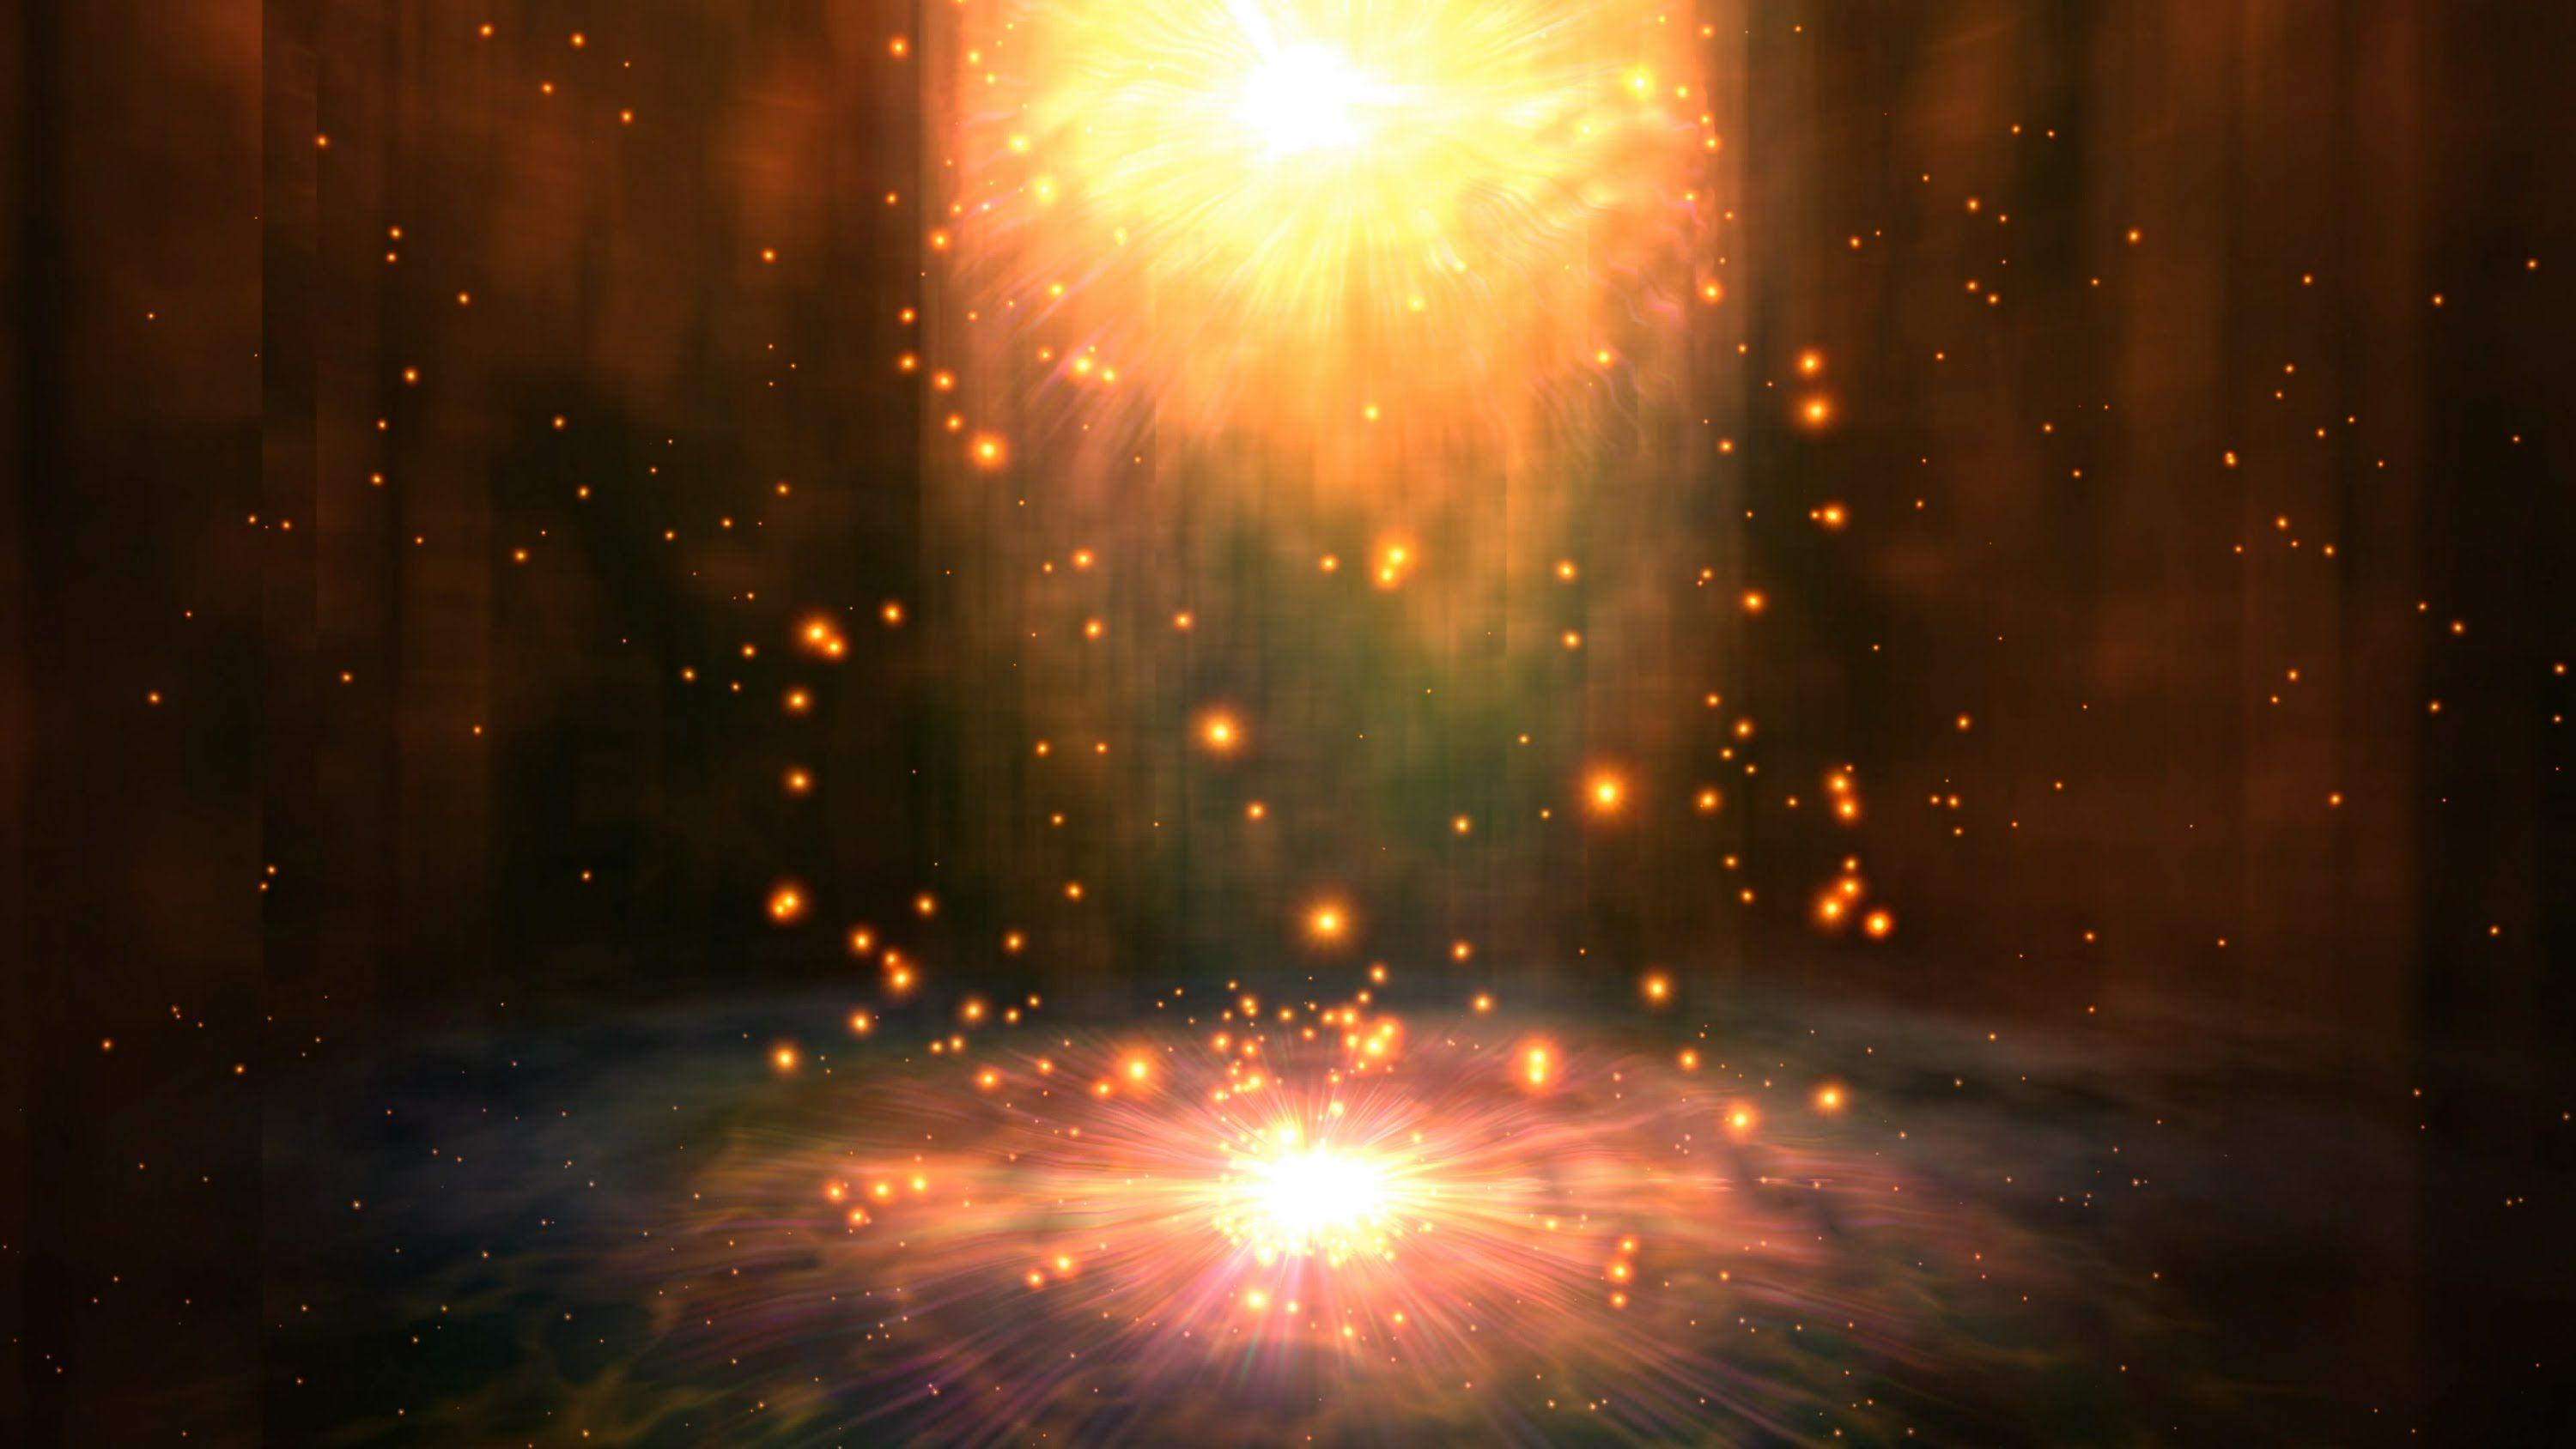 Magic Light Live Wallpaper Android Apps on Google Play. HD